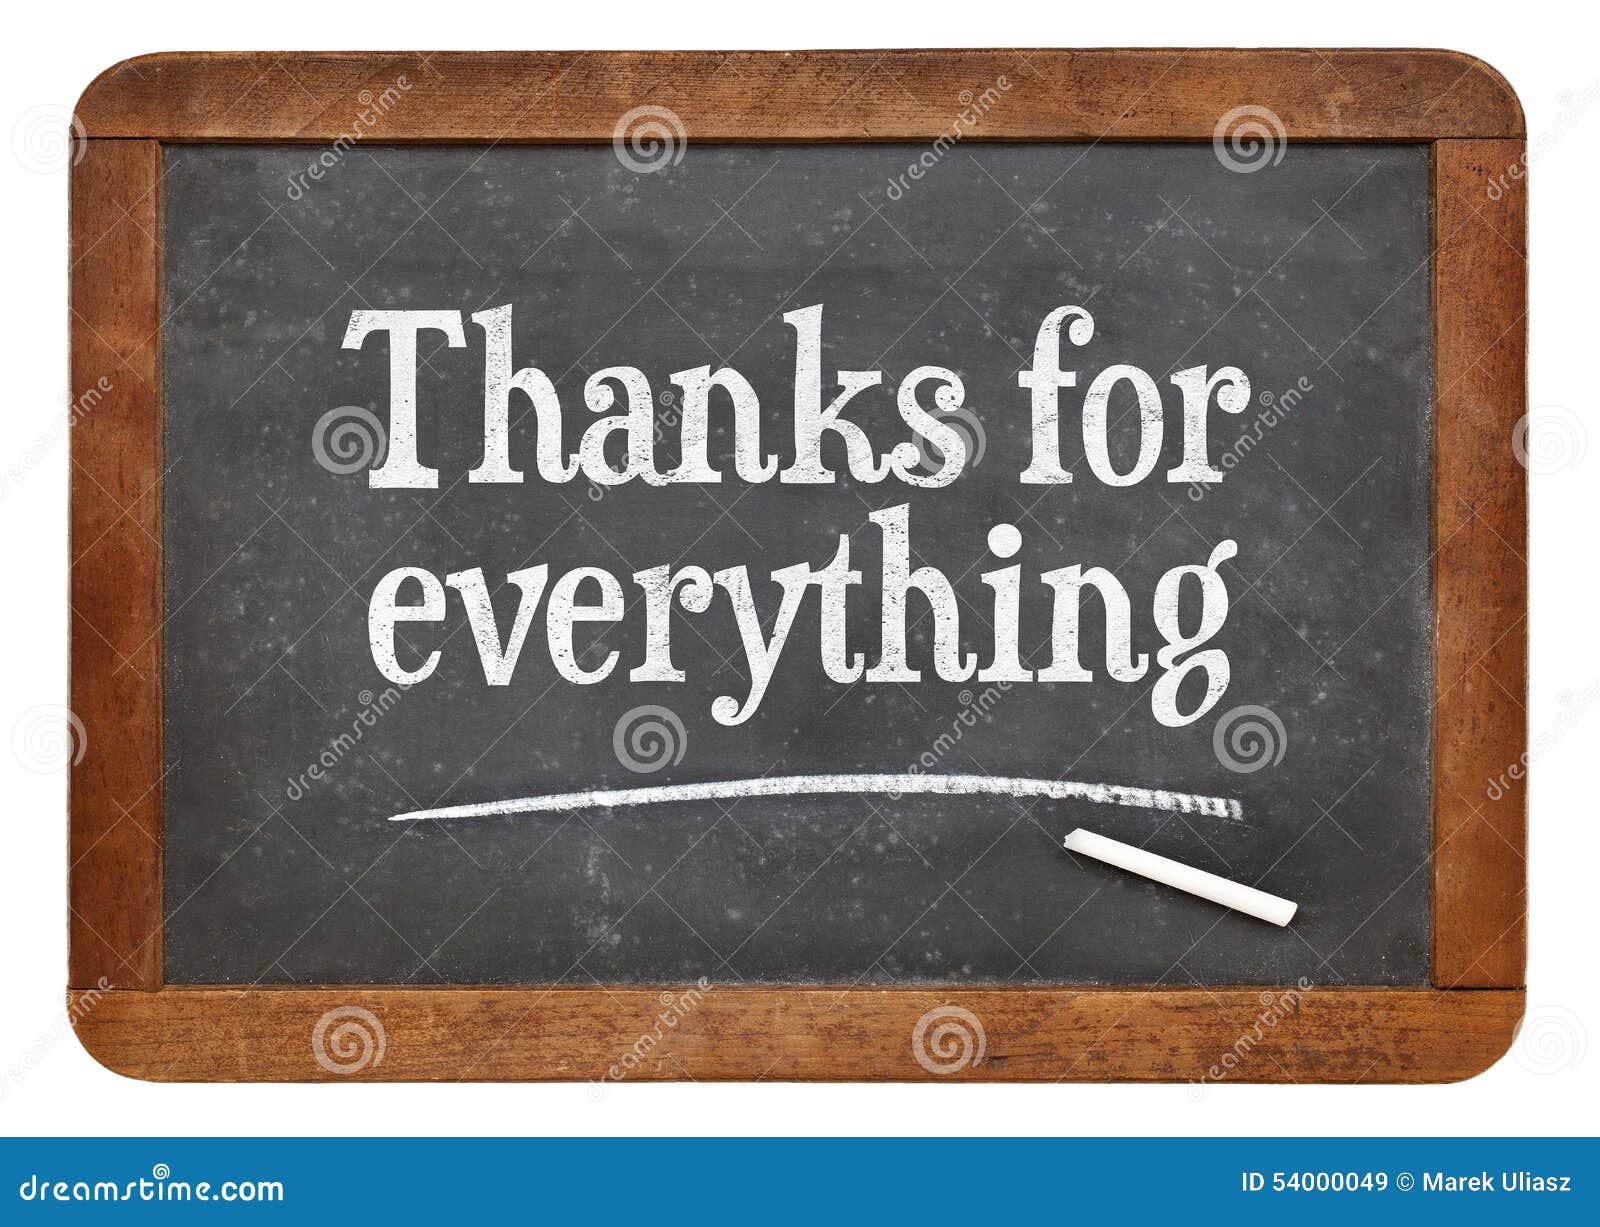 425 No Thank You Stock Photos - Free & Royalty-Free Stock Photos from  Dreamstime